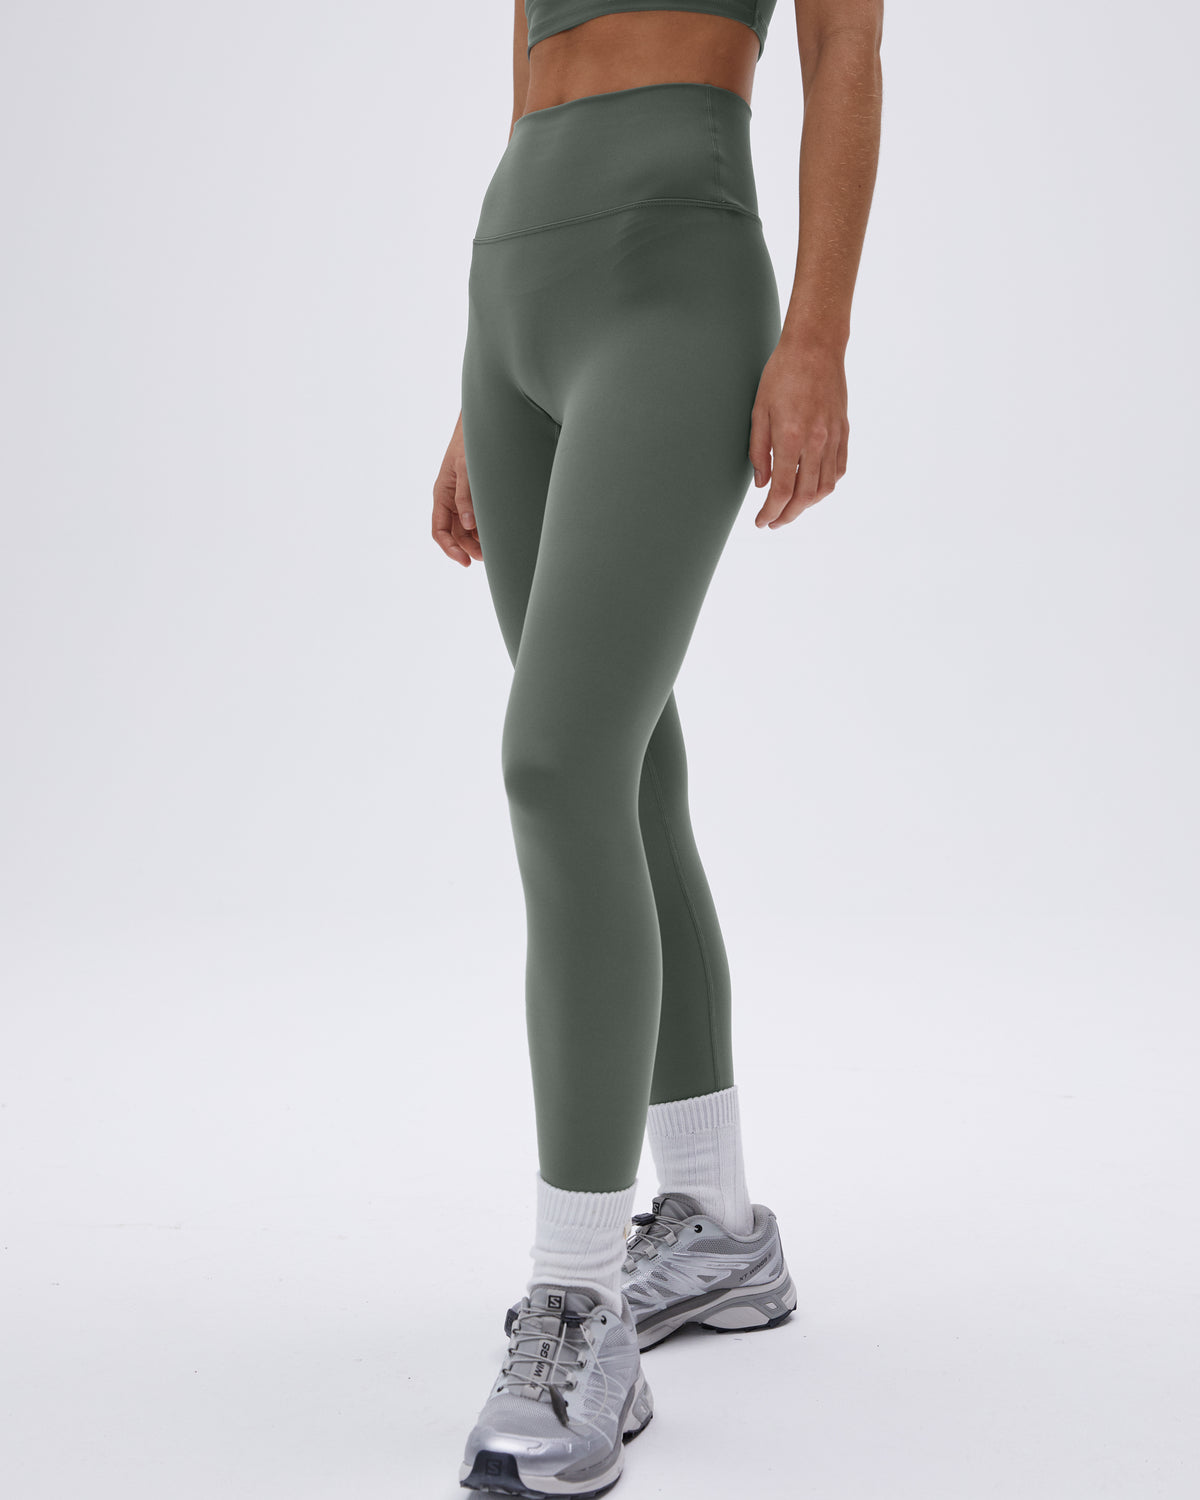  Light Sea Green Yoga Pants for Women Stretch Leggings Outfits  Compression Capris for Women X-Small : Clothing, Shoes & Jewelry